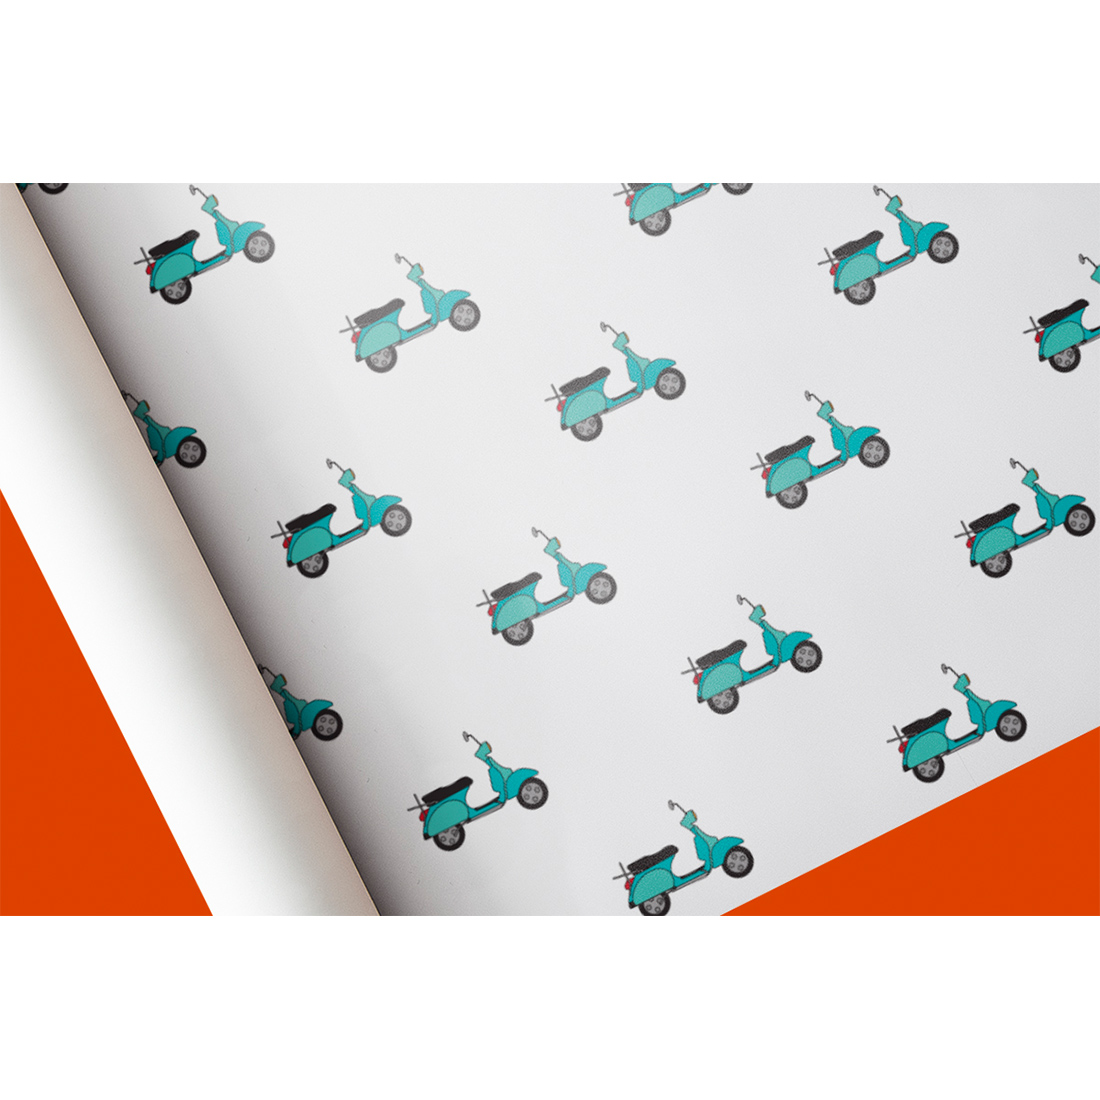 Image with wrapping paper with elegant patterns with motorcycles